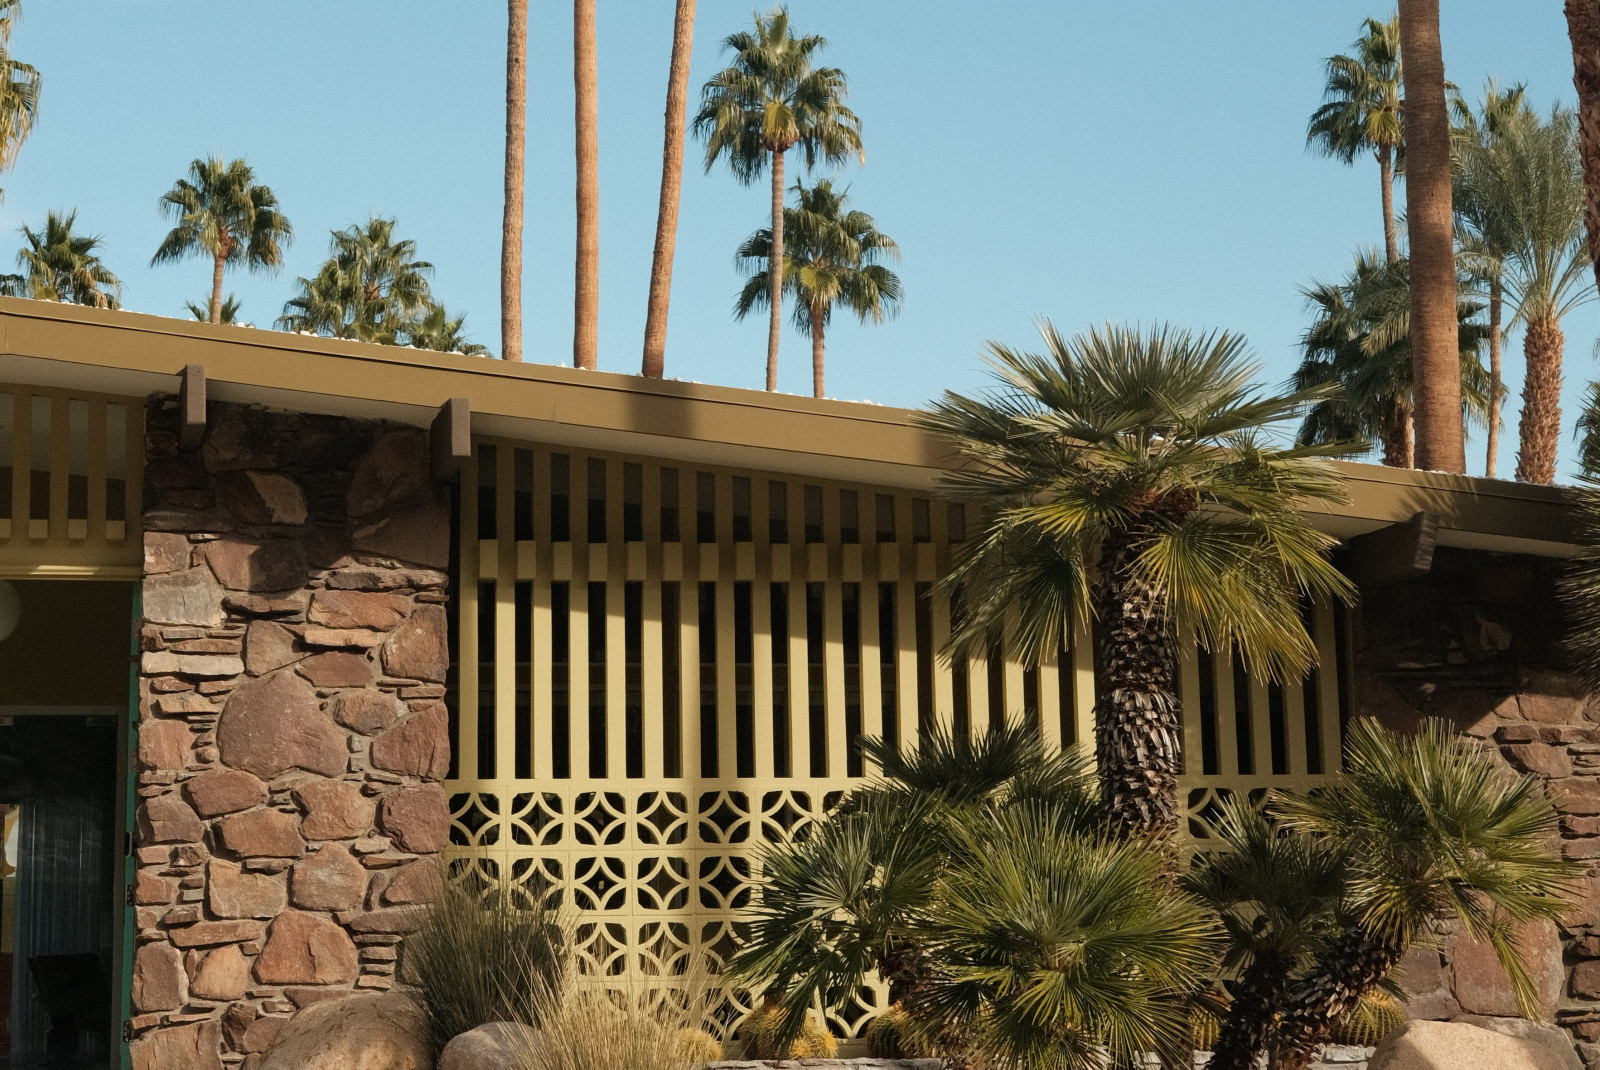 House next to palm trees during daytime